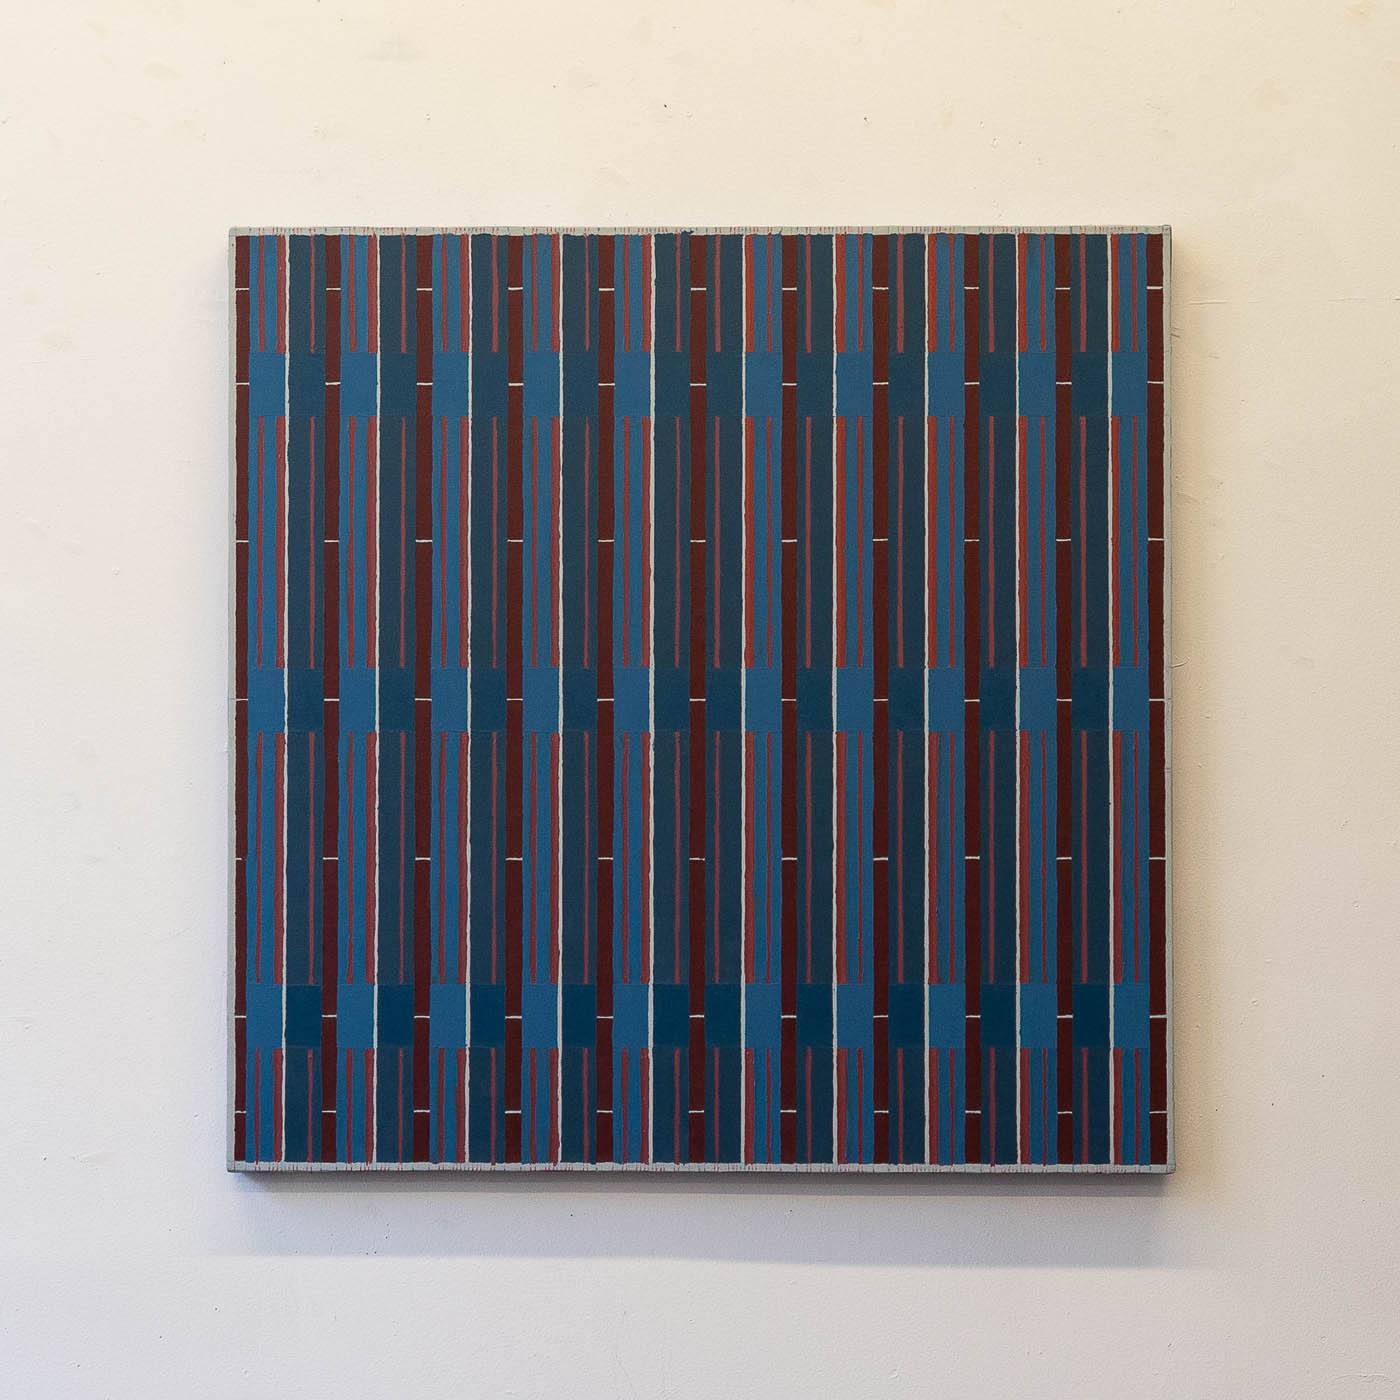 A painting replicating a woven textile